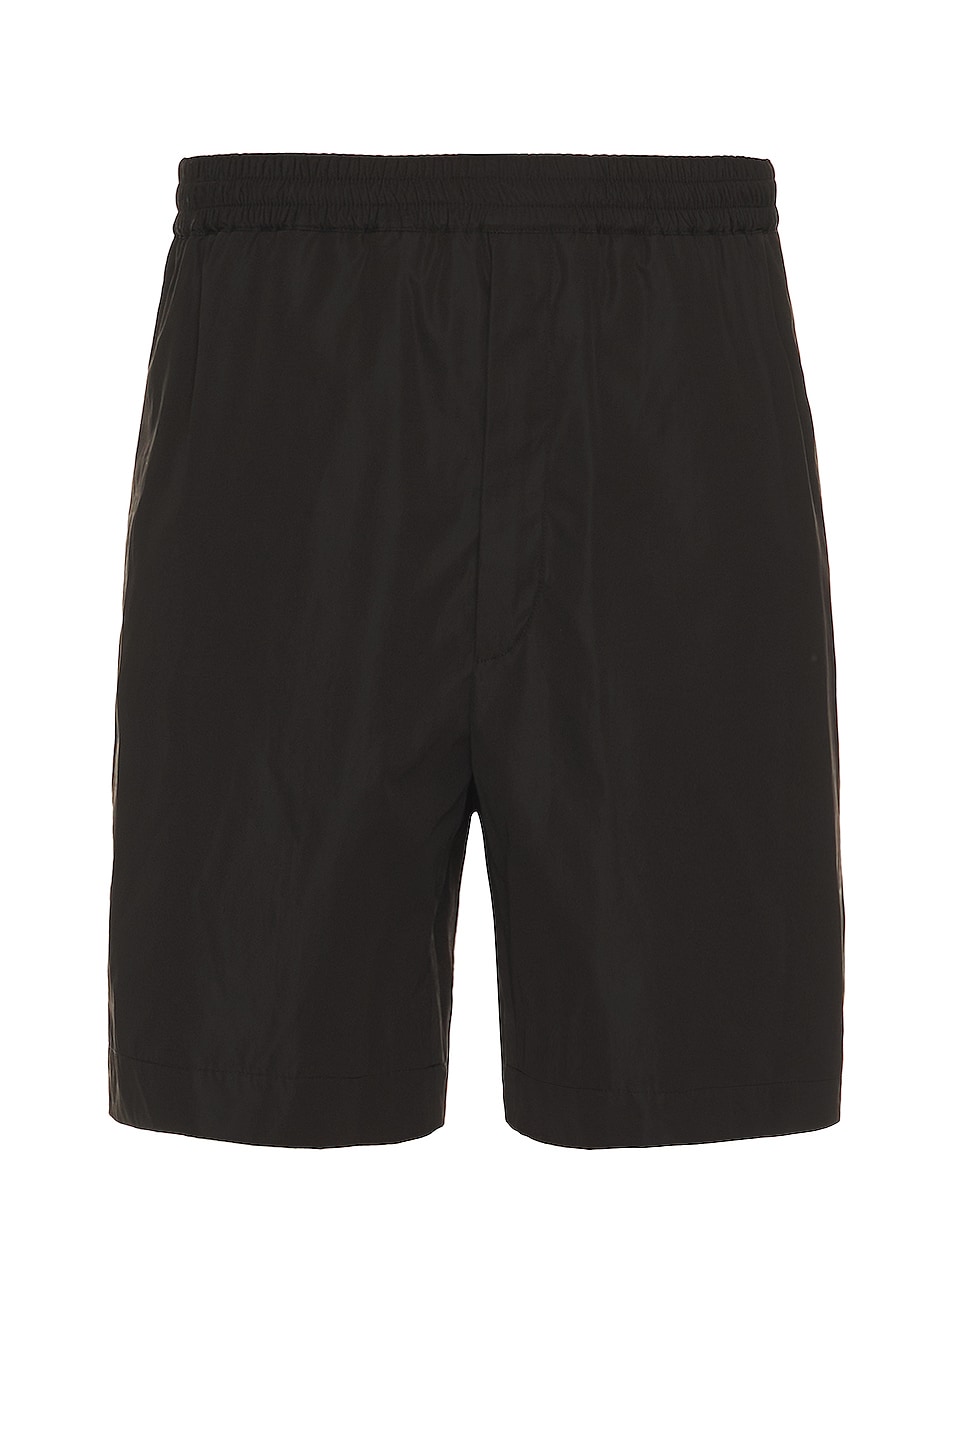 Image 1 of The Row Gerhardt Shorts in Black